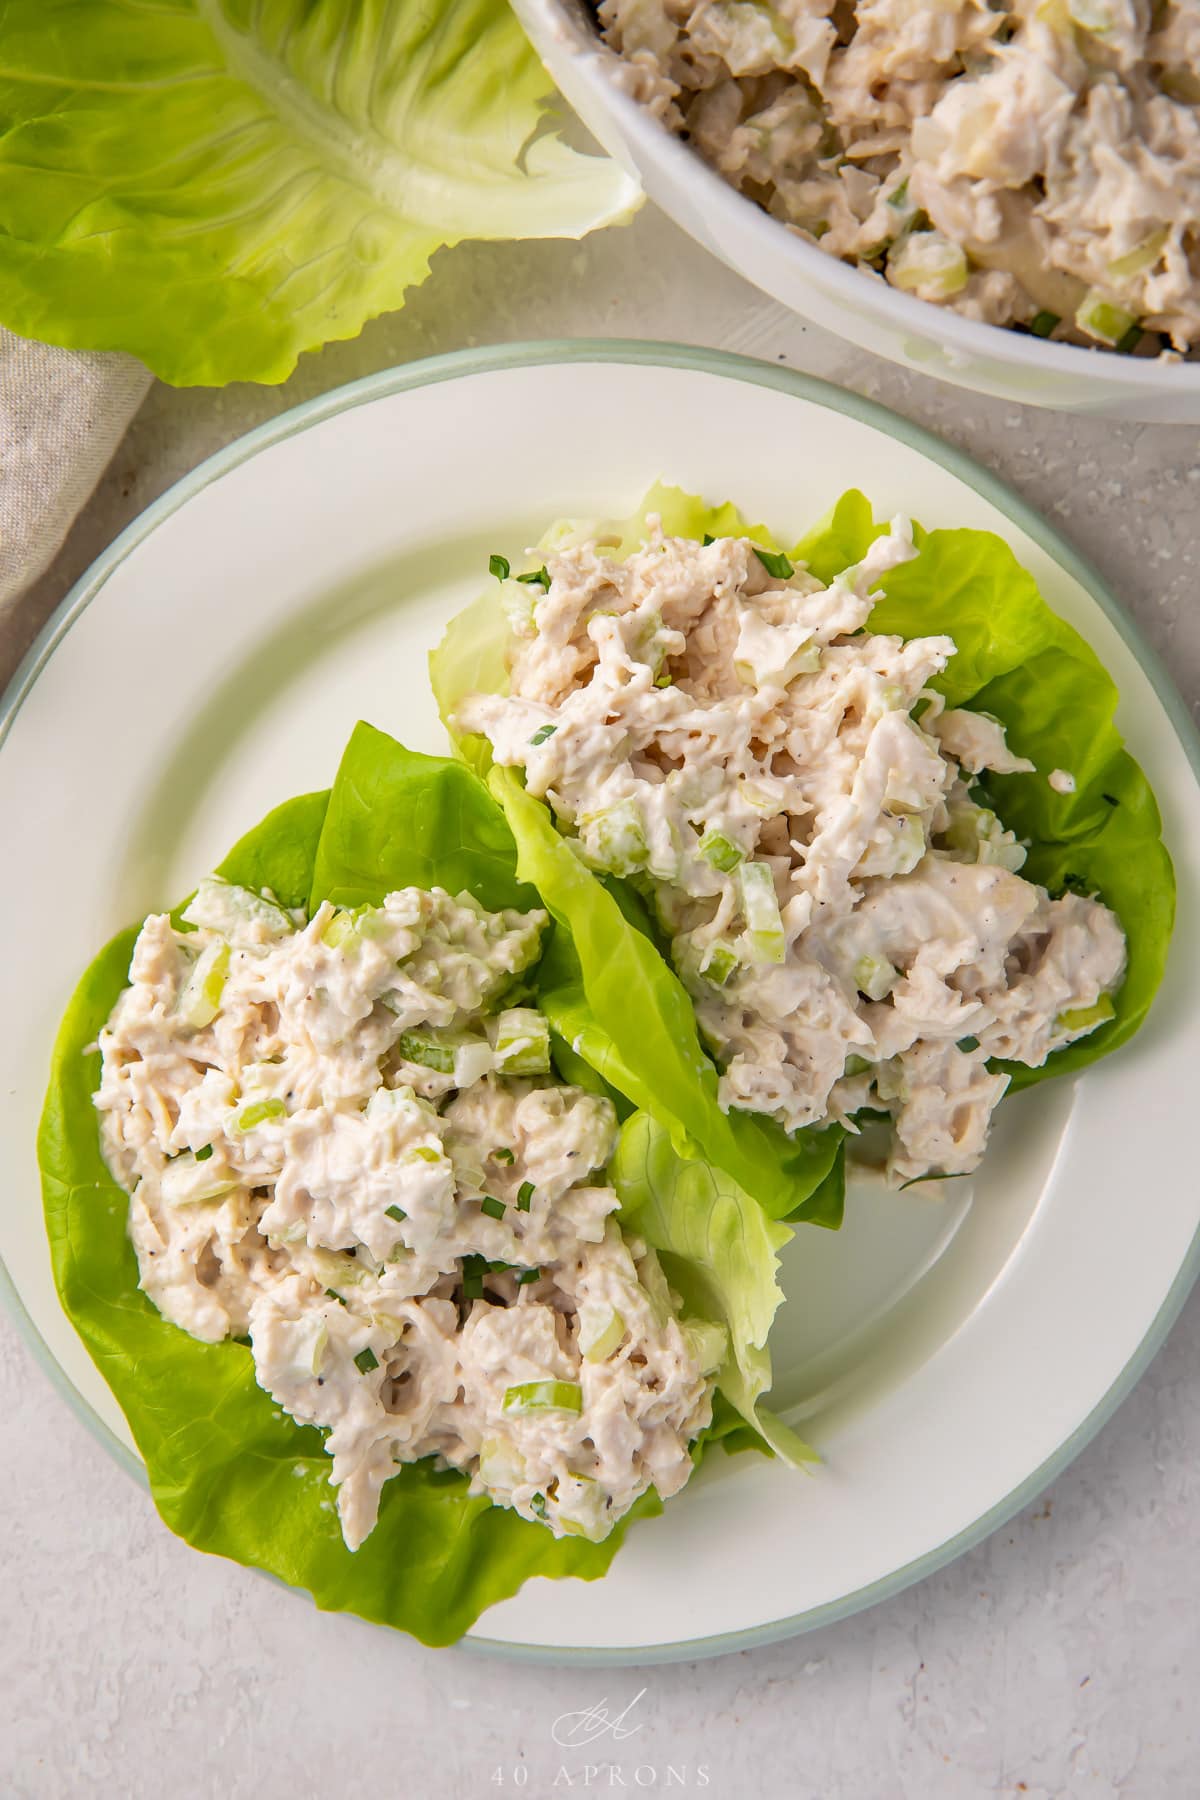 Keto chicken salad in lettuce wraps on a plate next to a bowl of chicken salad.